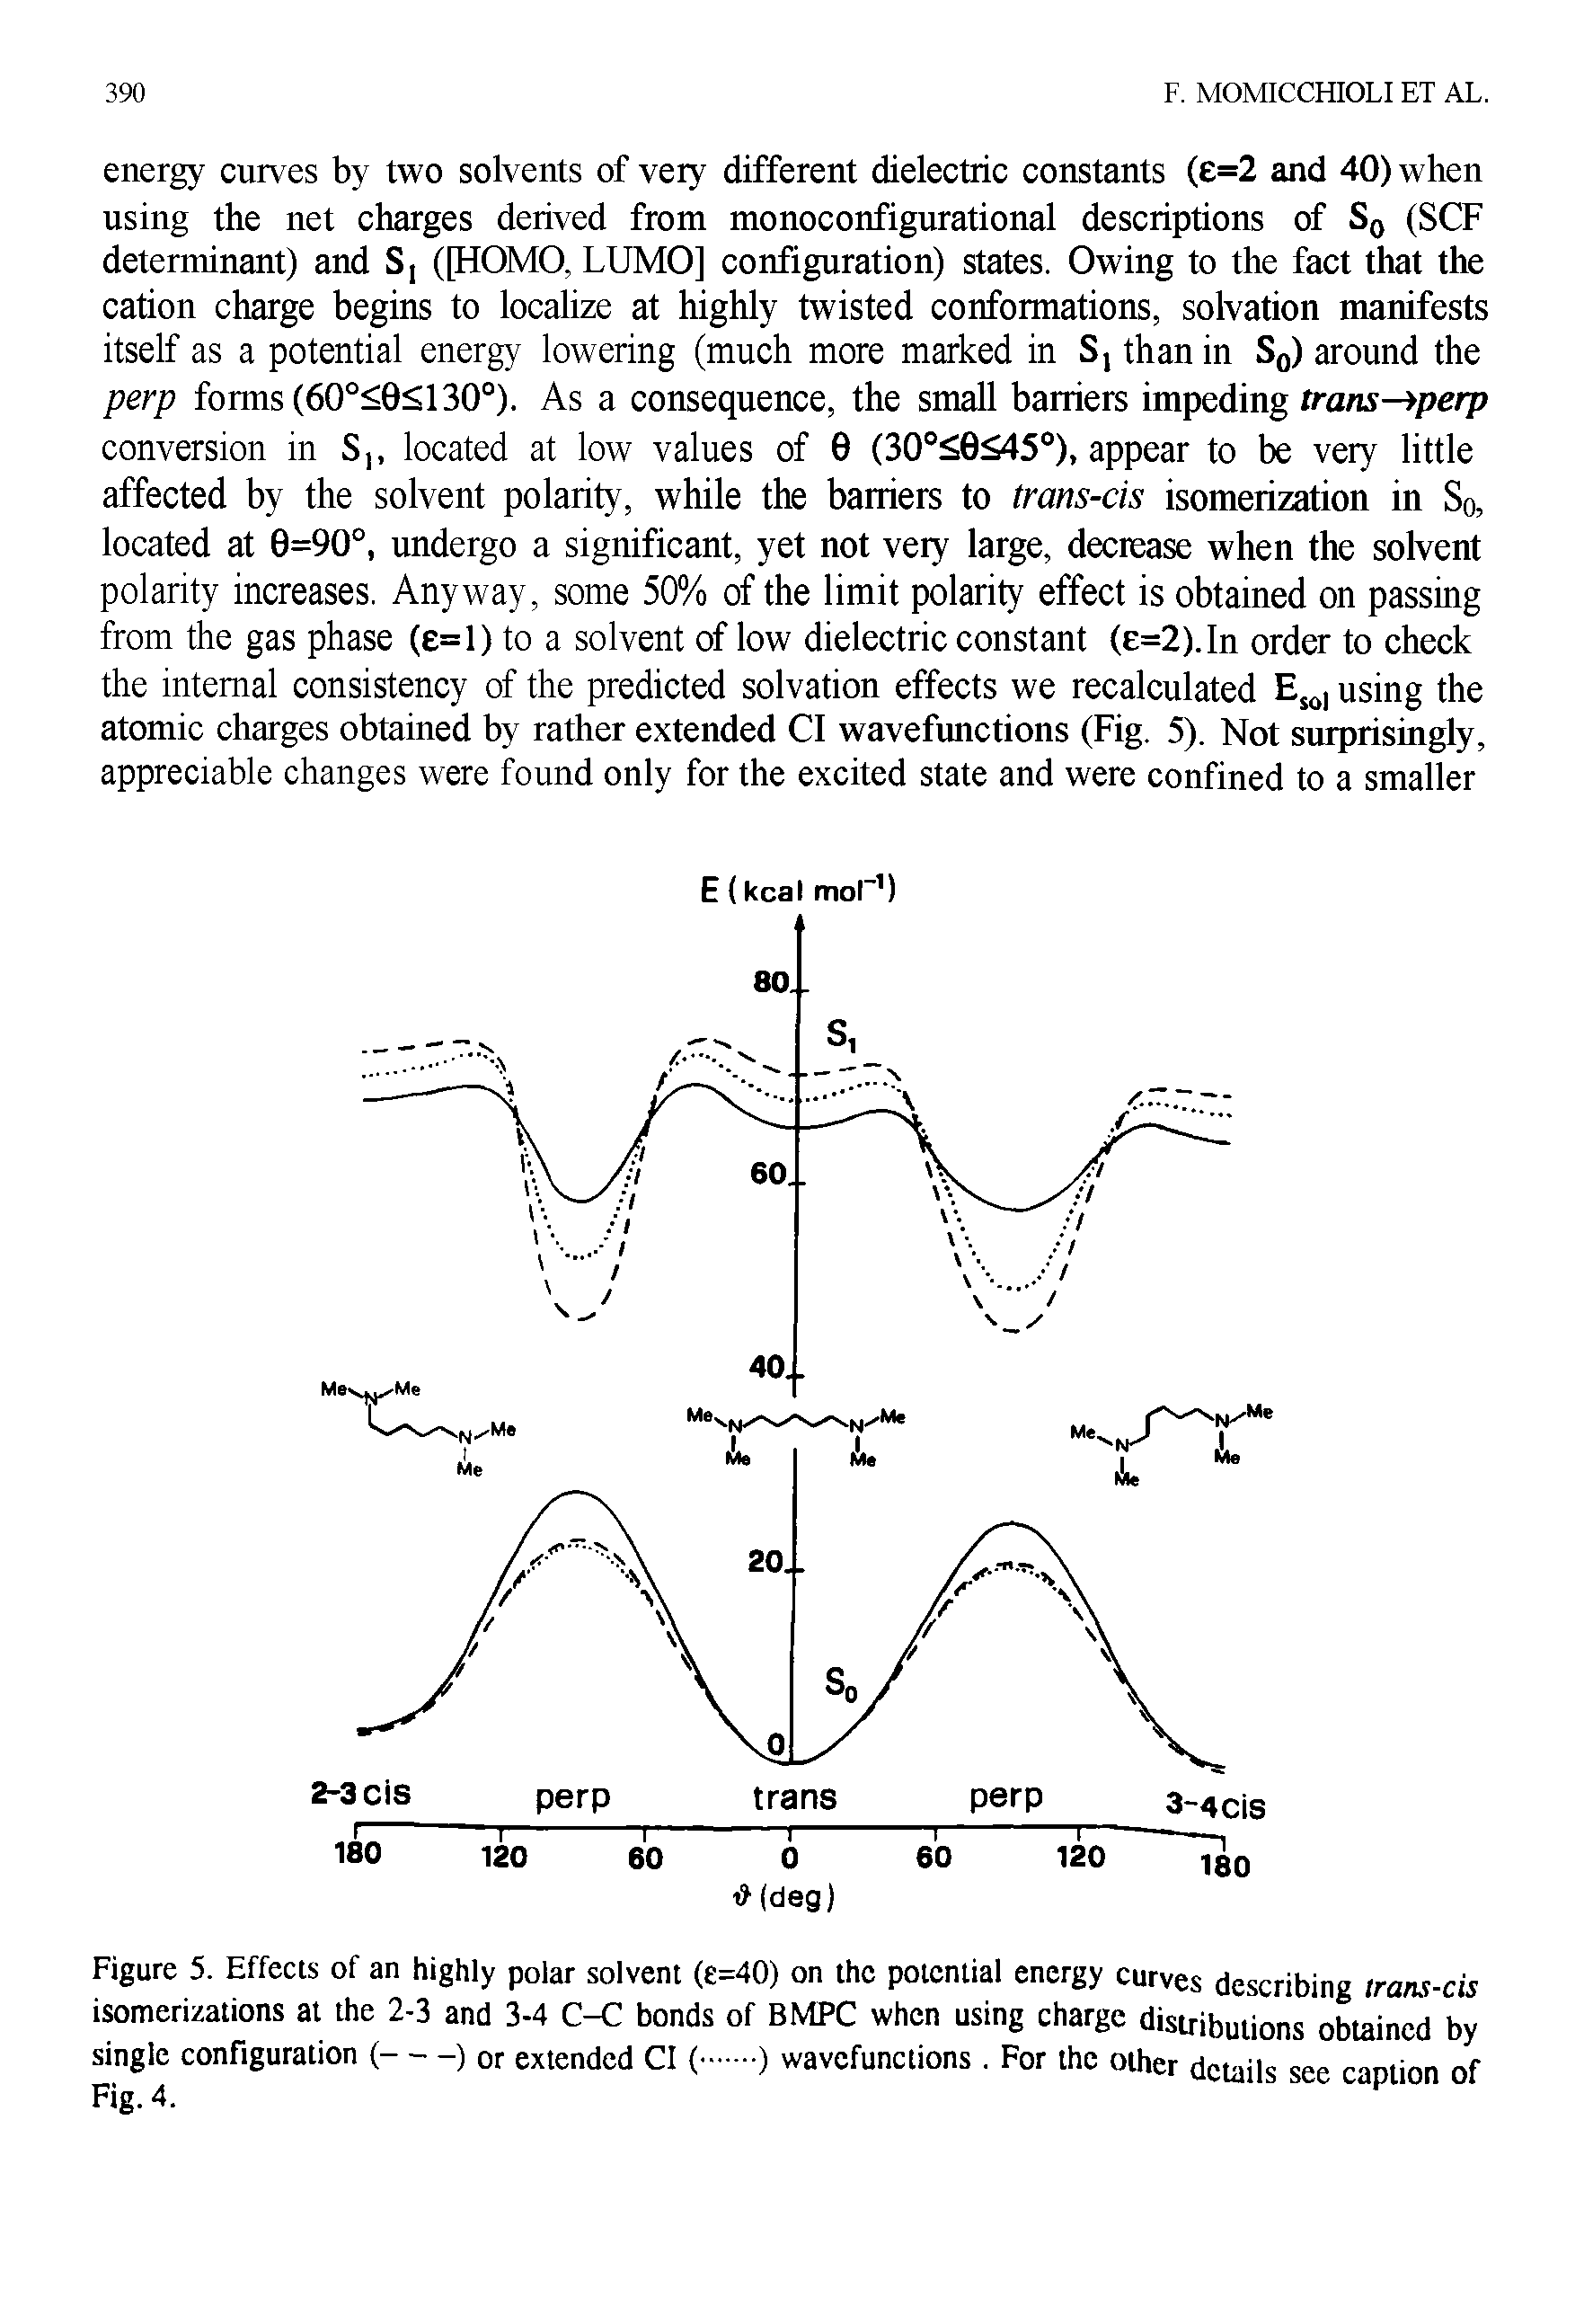 Figure 5. Effects of an highly polar solvent (e=40) on the potential energy curves describing trans-cis isomerizations at the 2-3 and 3-4 C-C bonds of BMPC when using charge distributions obtained by...